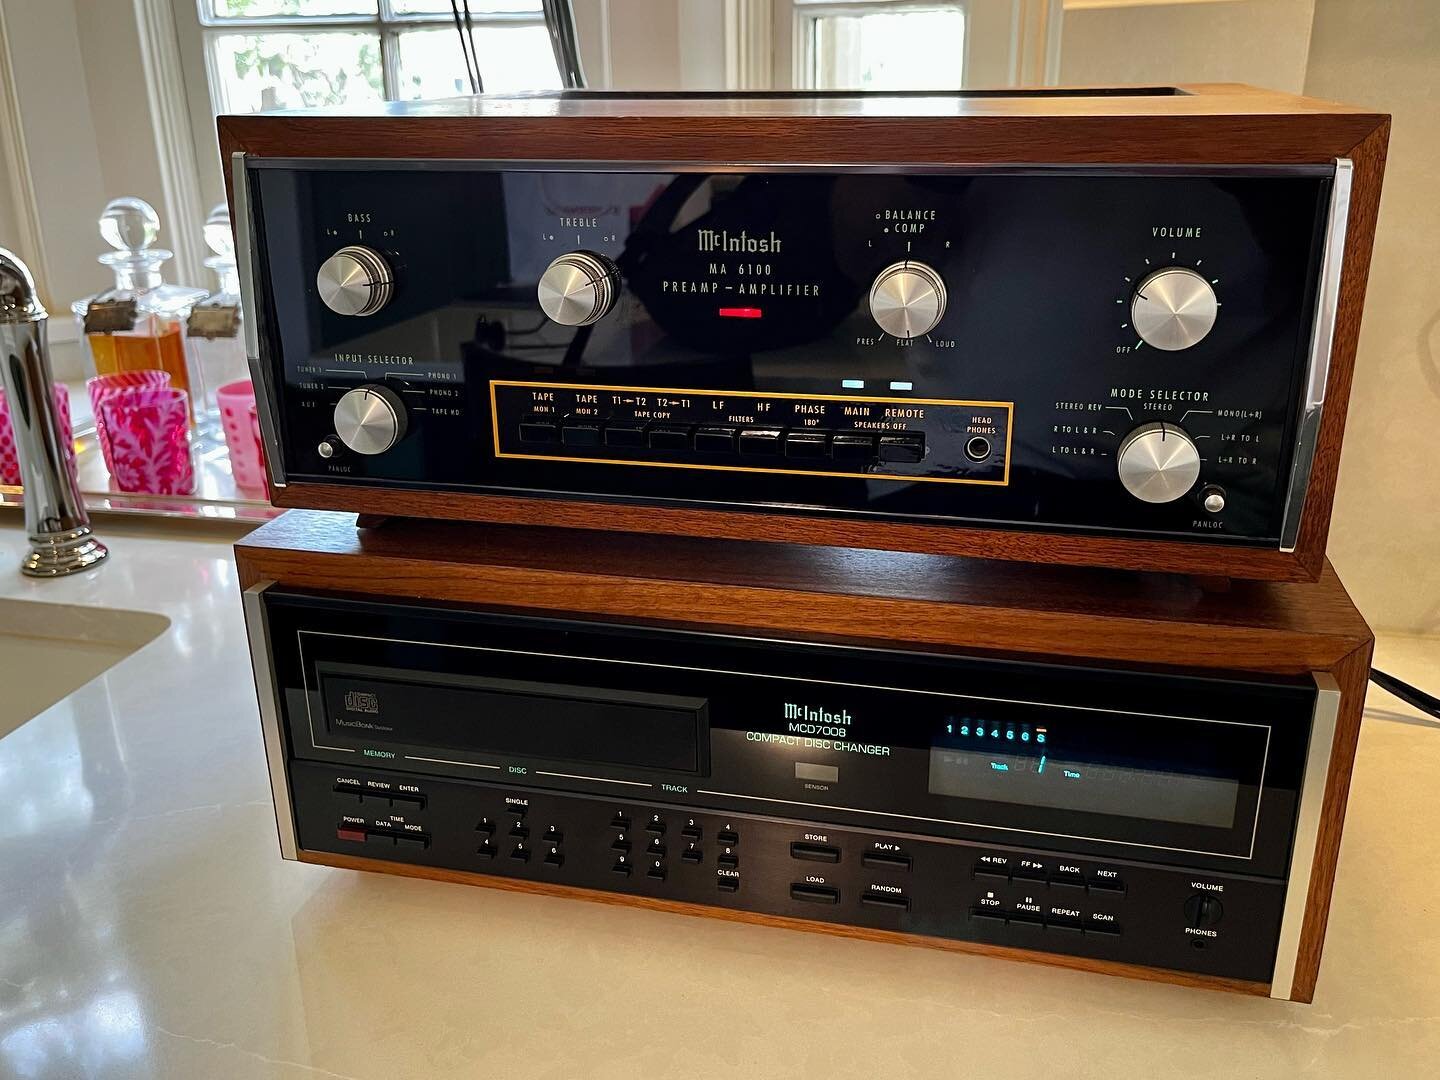 Did you know we have a passion for vintage audio? We partner with Absolute Sound Laboratories to fully restore pieces to factory spec and beyond. A custom fabricated walnut cabinet has this MCD7008 looking right at home next to the MA6100 #mcintosh #